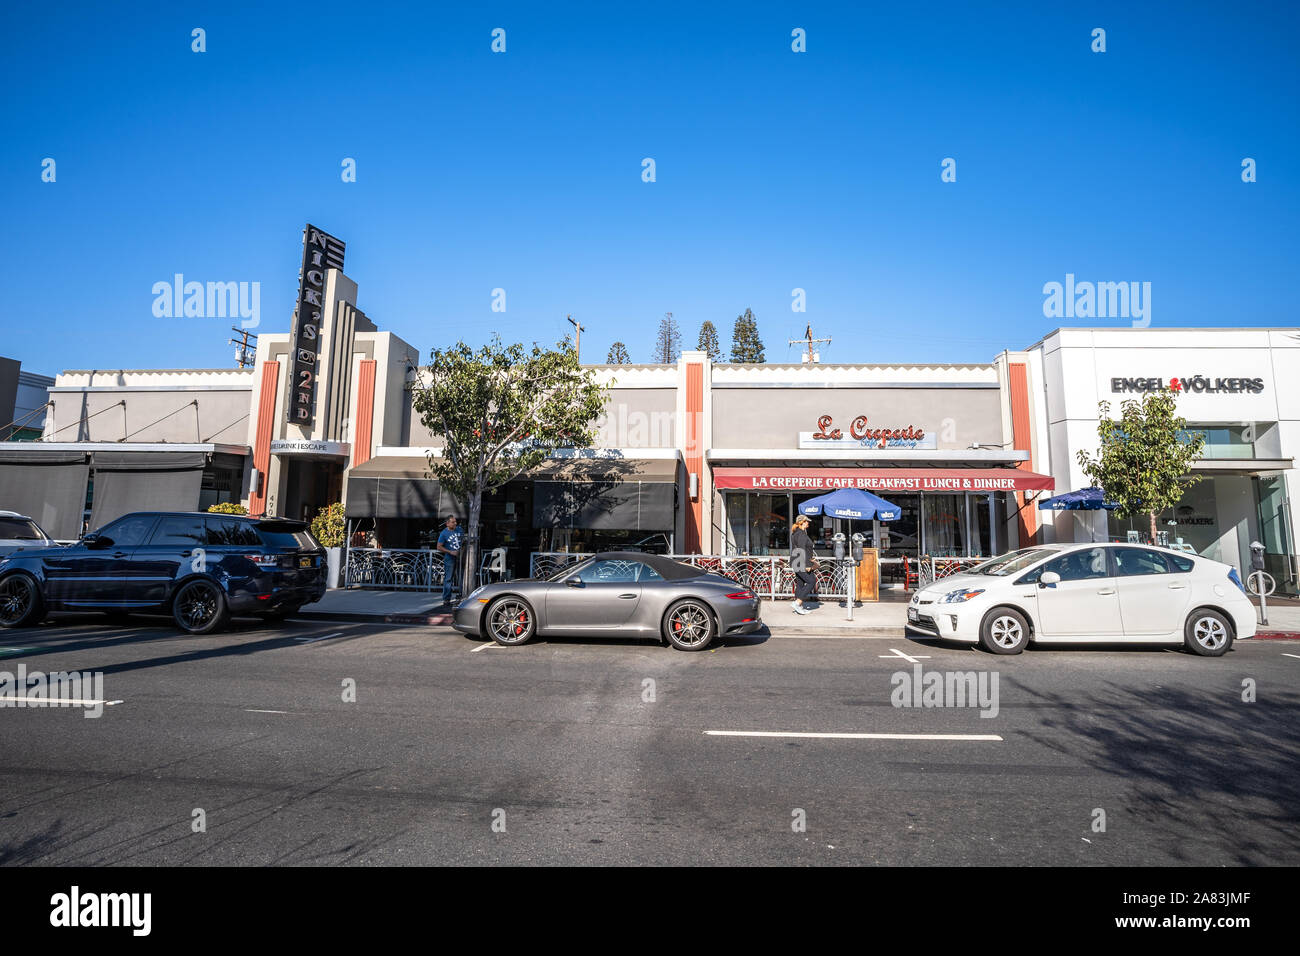 Restaurants and shops on Second Street in Long Beach, California Stock Photo